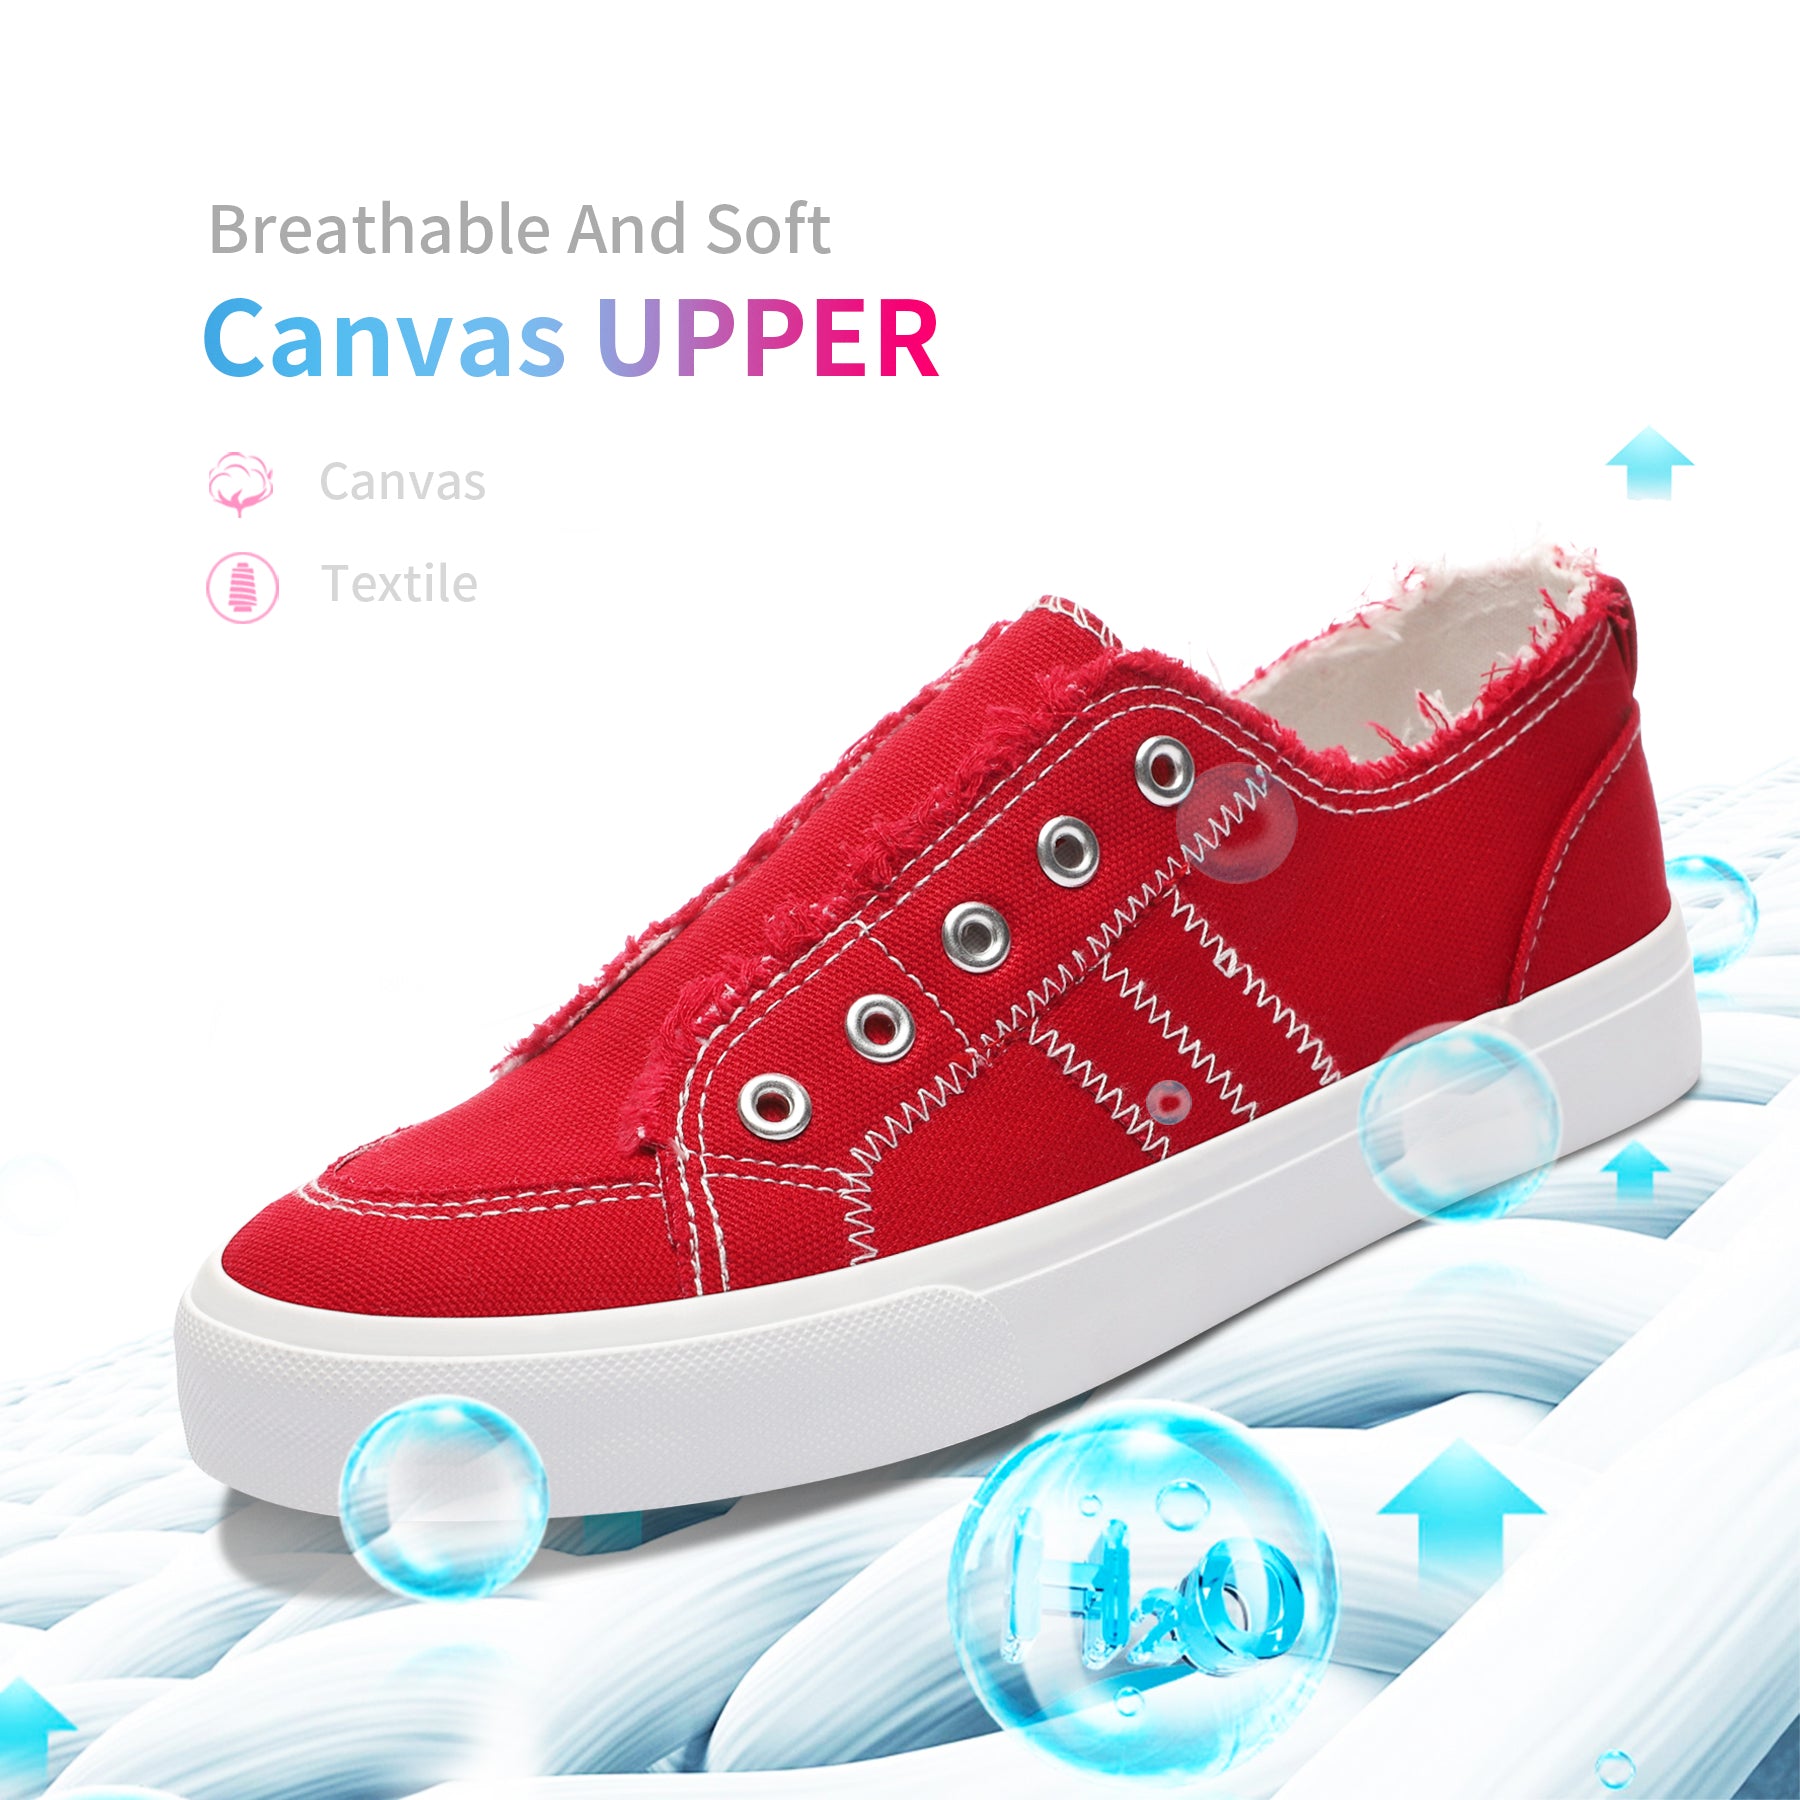 Cipramo Womens Sneakers Canvas Shoes,Girls Sneakers Canvas Shoe for  Walk|Run|Gym|College Canvas Shoes For Women - Buy Cipramo Womens Sneakers  Canvas Shoes,Girls Sneakers Canvas Shoe for Walk|Run|Gym|College Canvas  Shoes For Women Online at